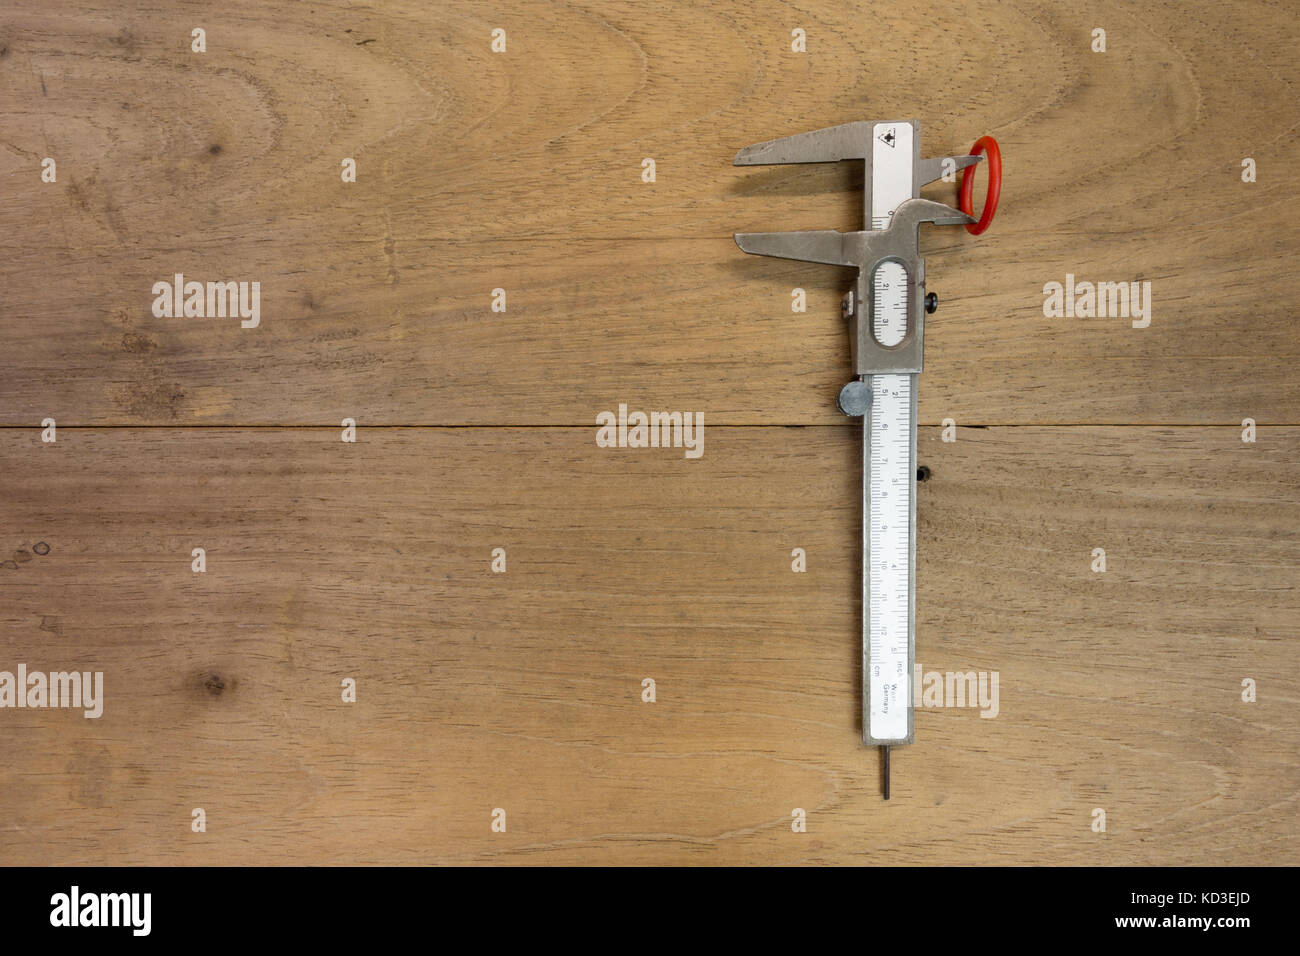 Vernier caliper with red ring on wooden background, flat lay Stock Photo